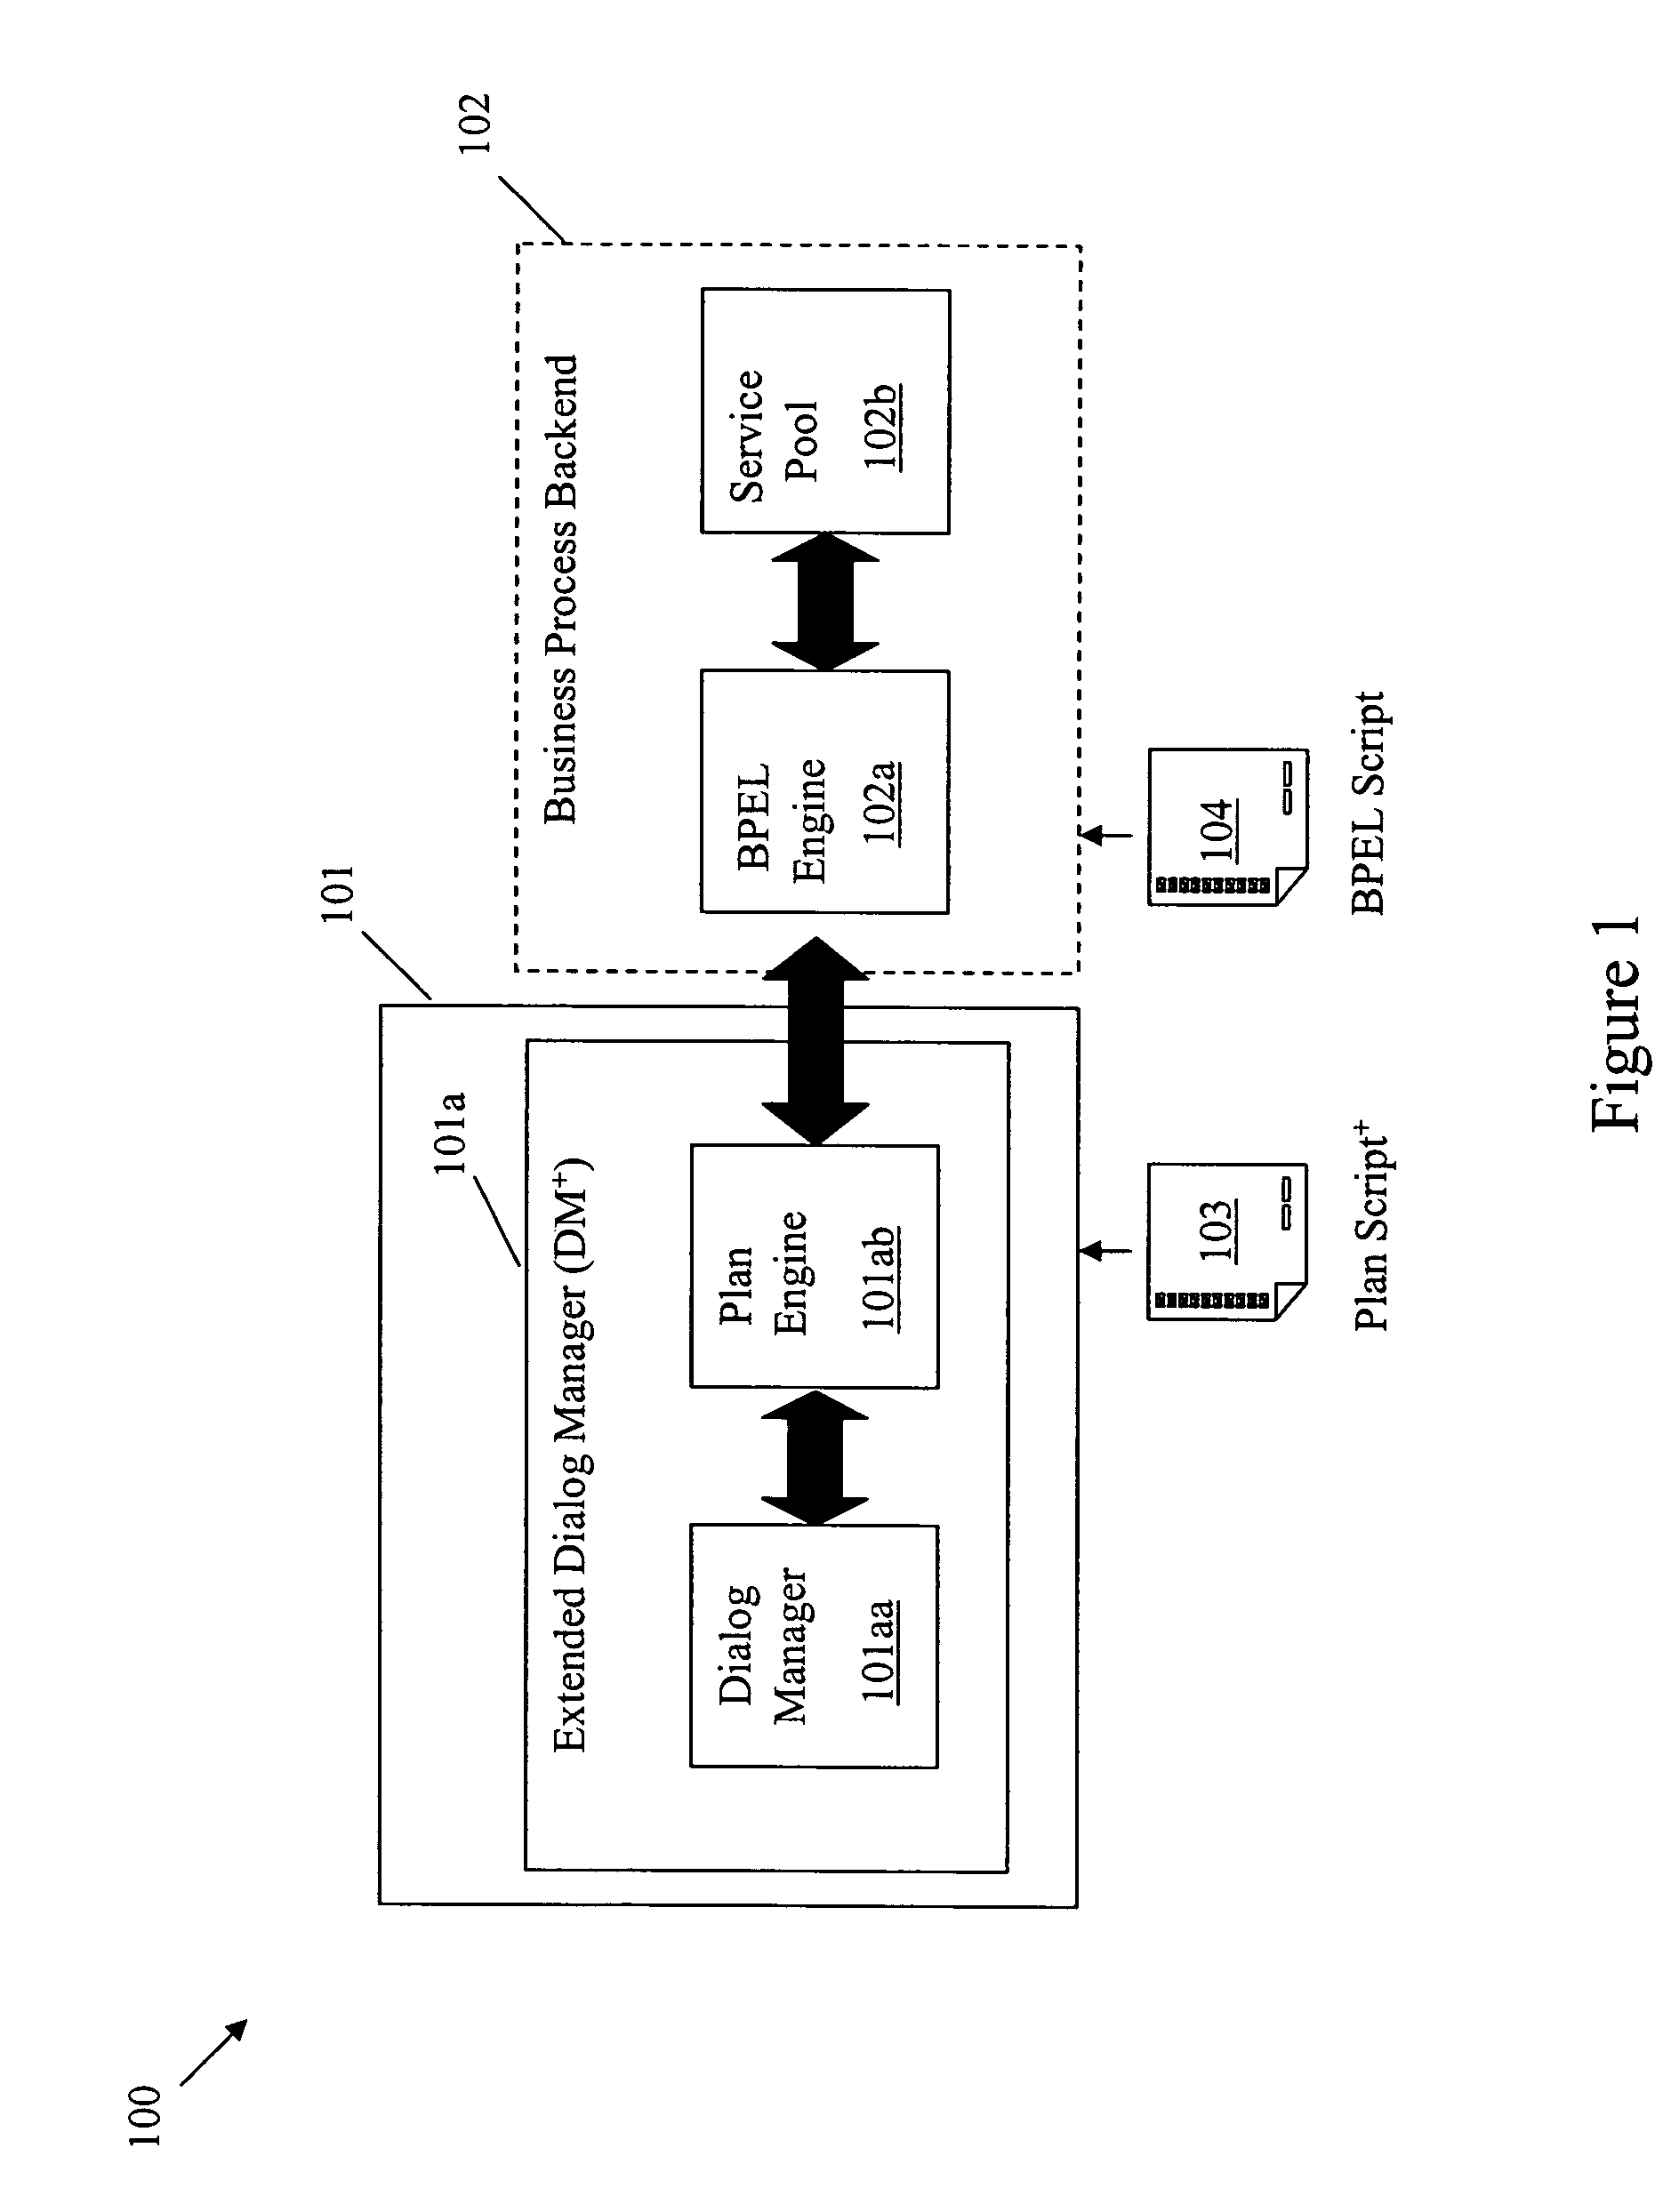 Method and system for extending dialog systems to process complex activities for applications